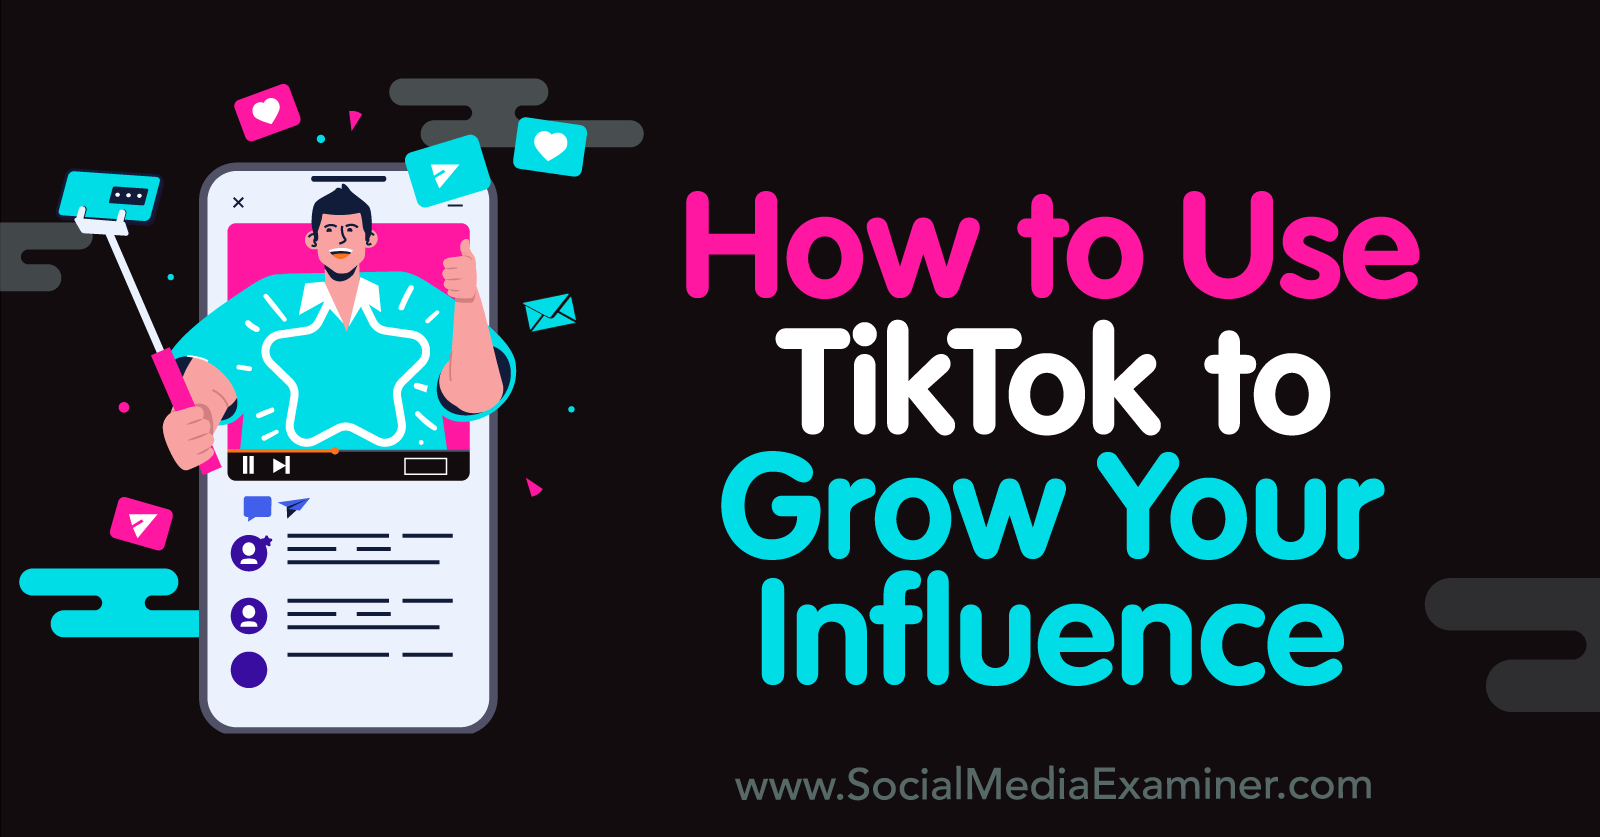 How to Use TikTok to Share Your Personal Growth